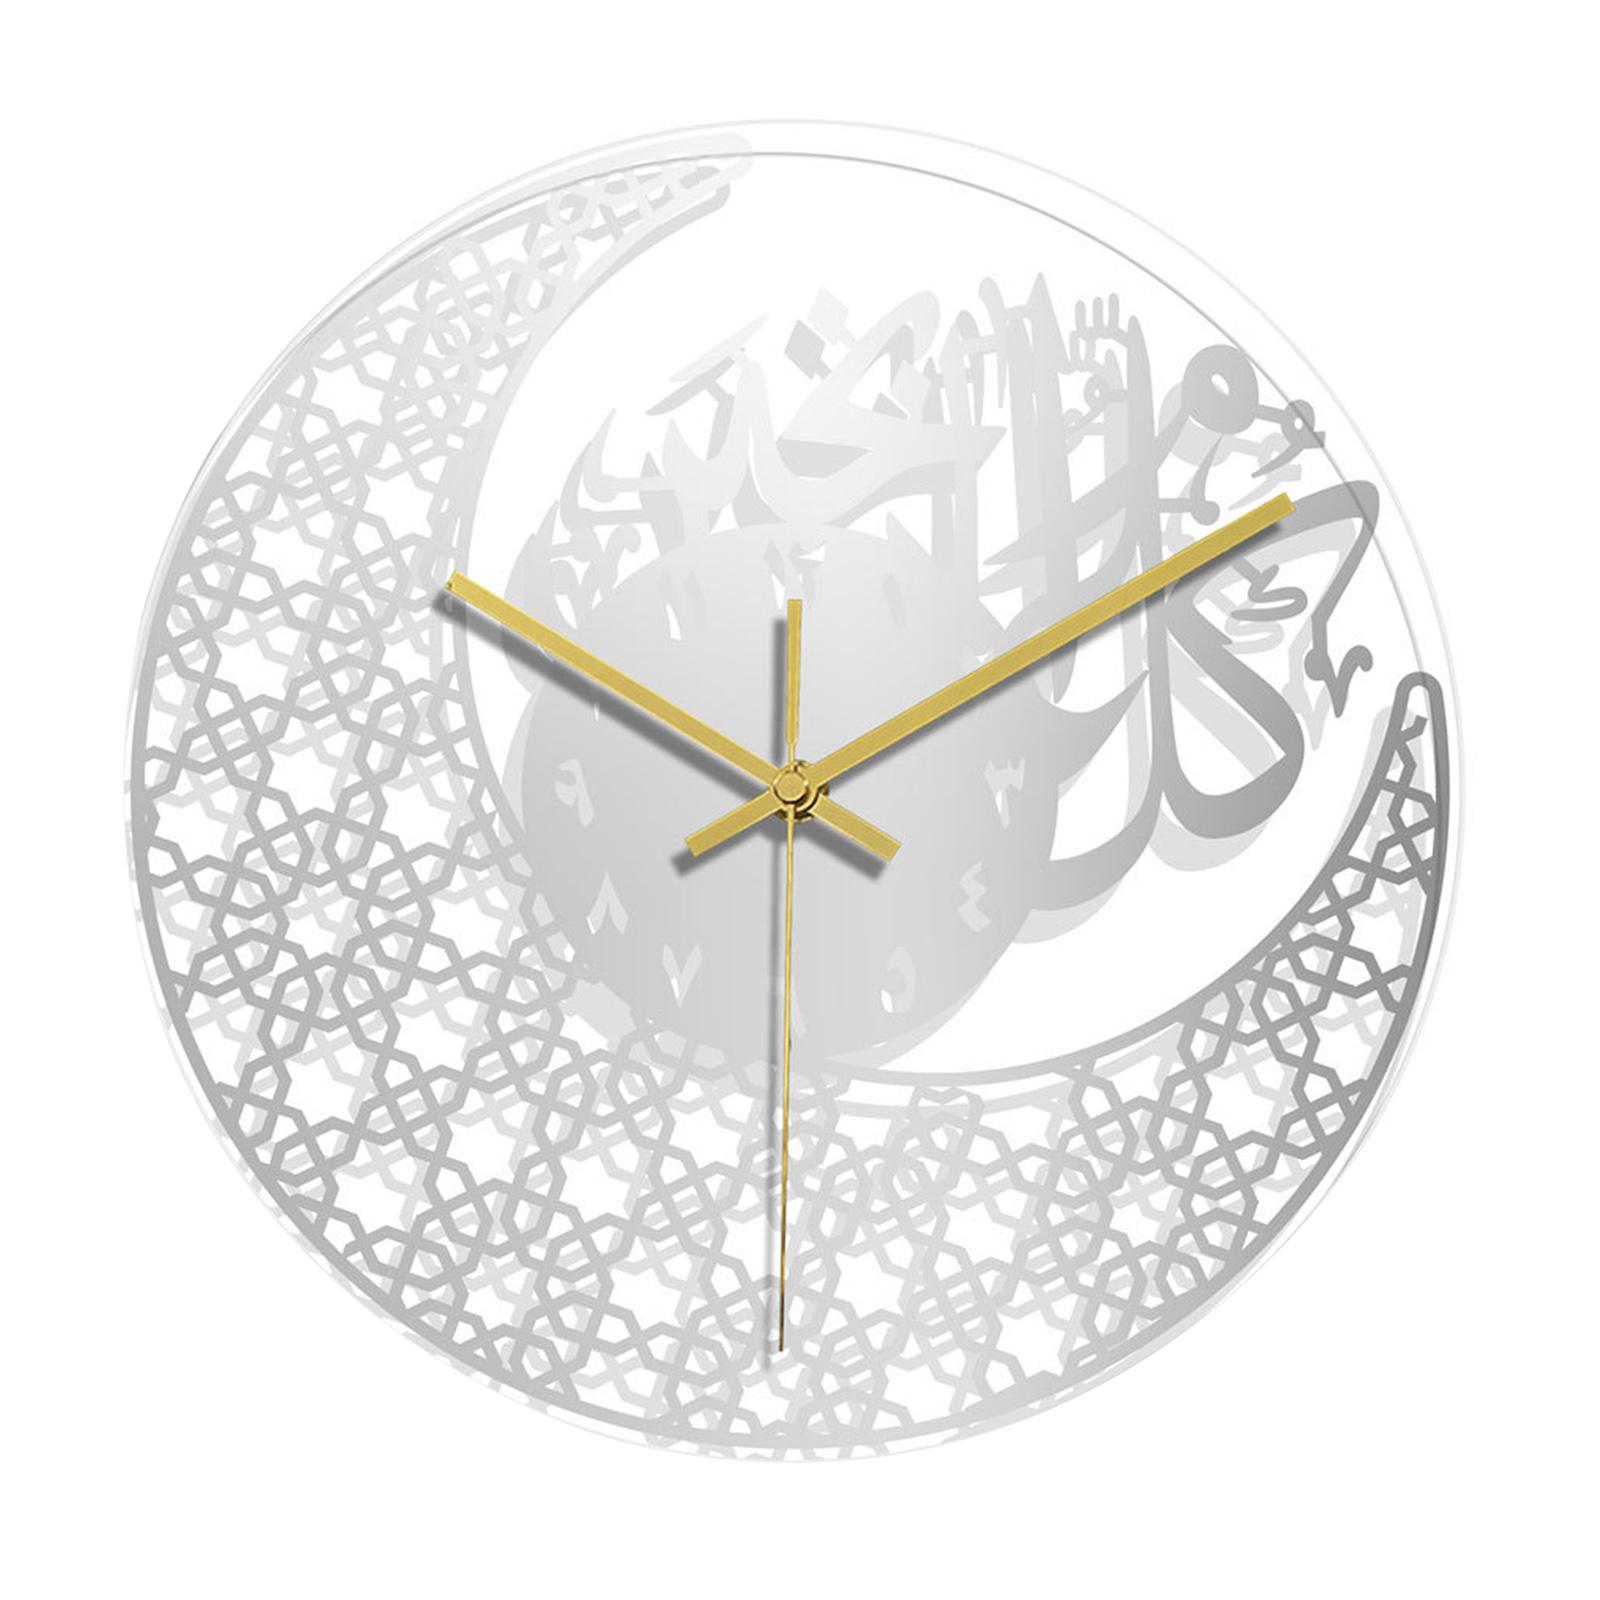 Islamic Calligraphy Wall Clock Silent Decorative for Home Kitchen Wall Decor Silver